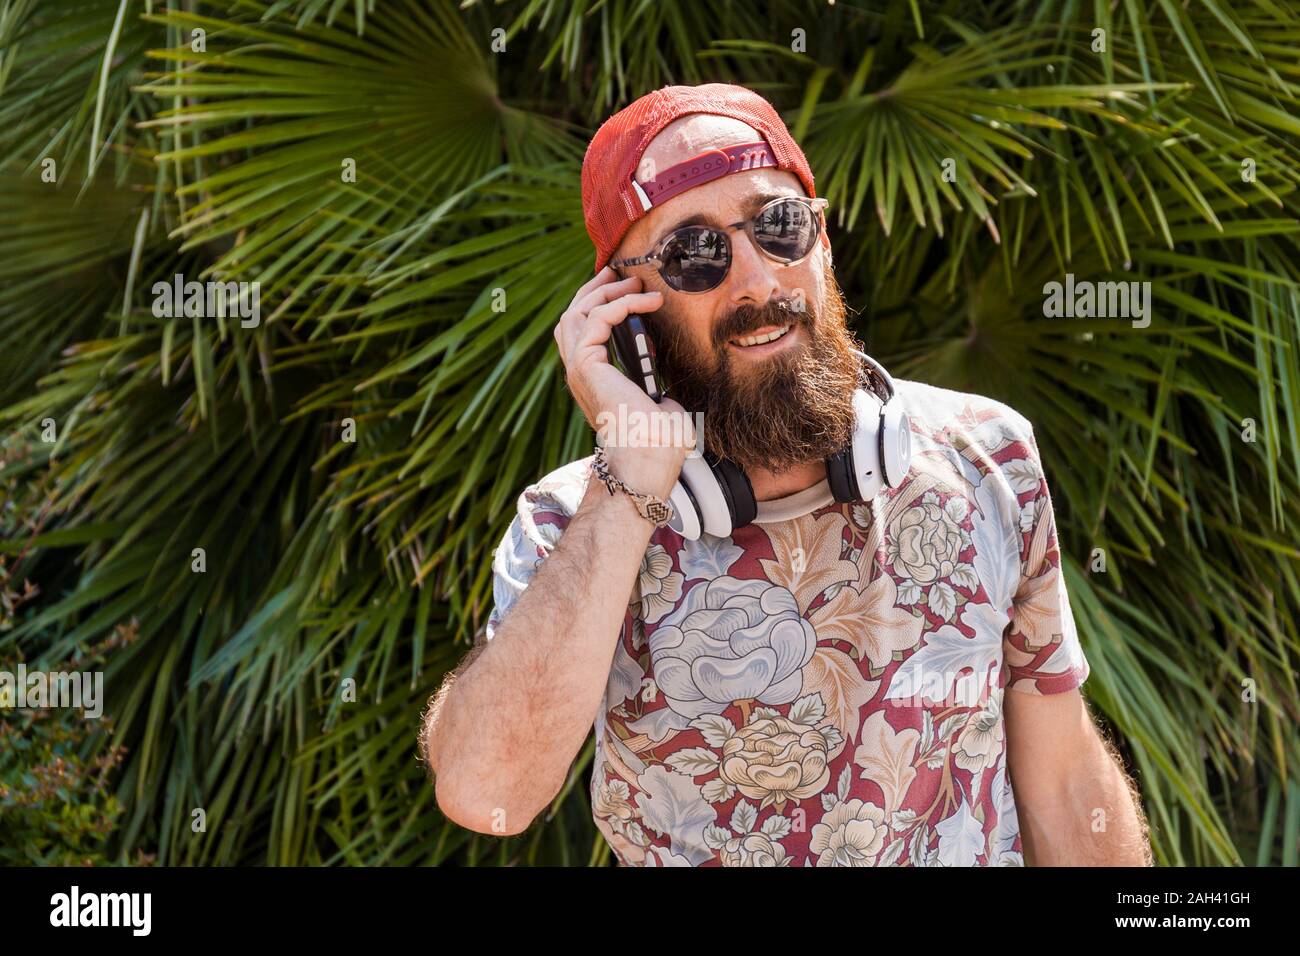 Mature man with red basecap, sunglasses and white headphones using smartphone Stock Photo